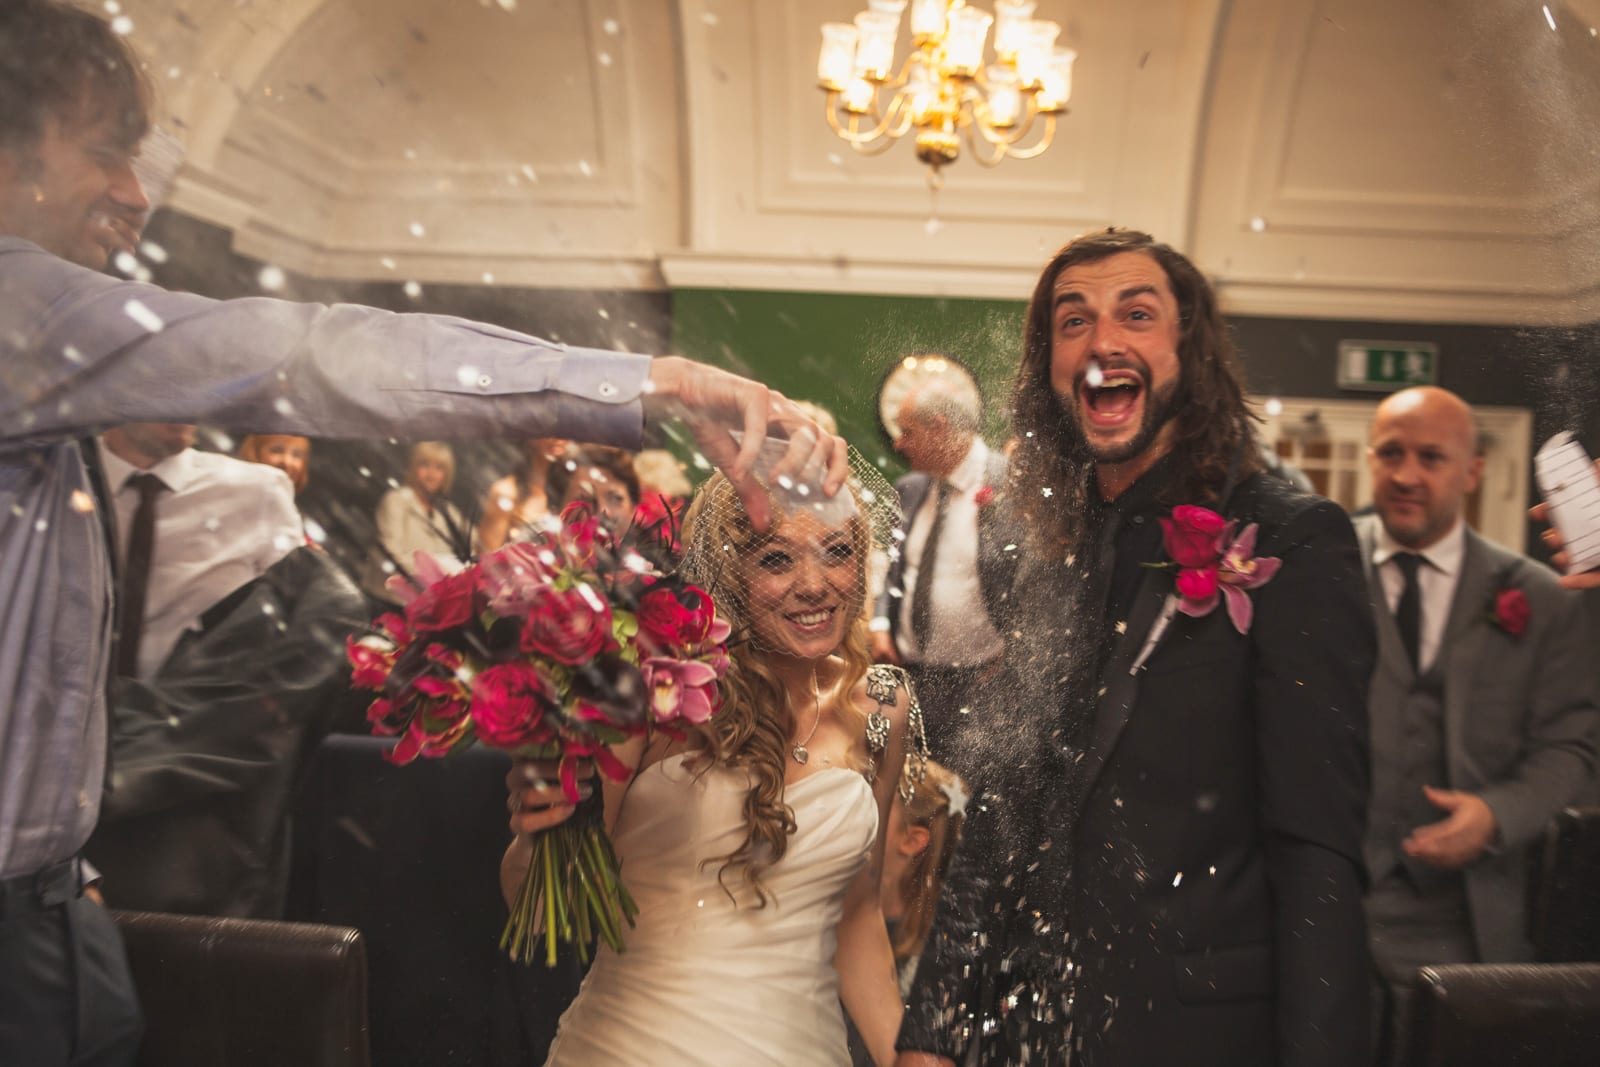 bridebook.co.uk happy couple being showered in confetti